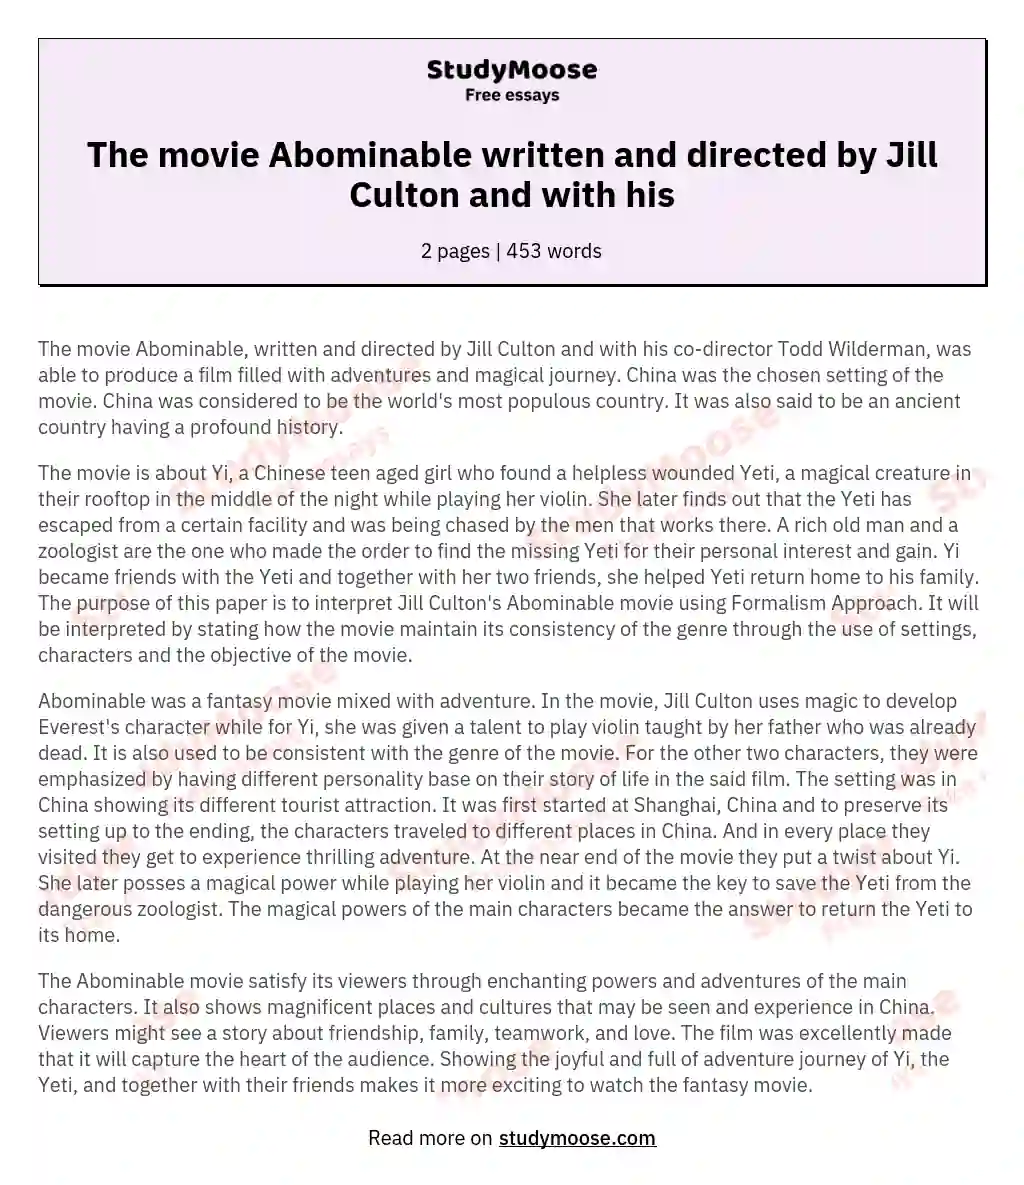 The movie Abominable written and directed by Jill Culton and with his essay